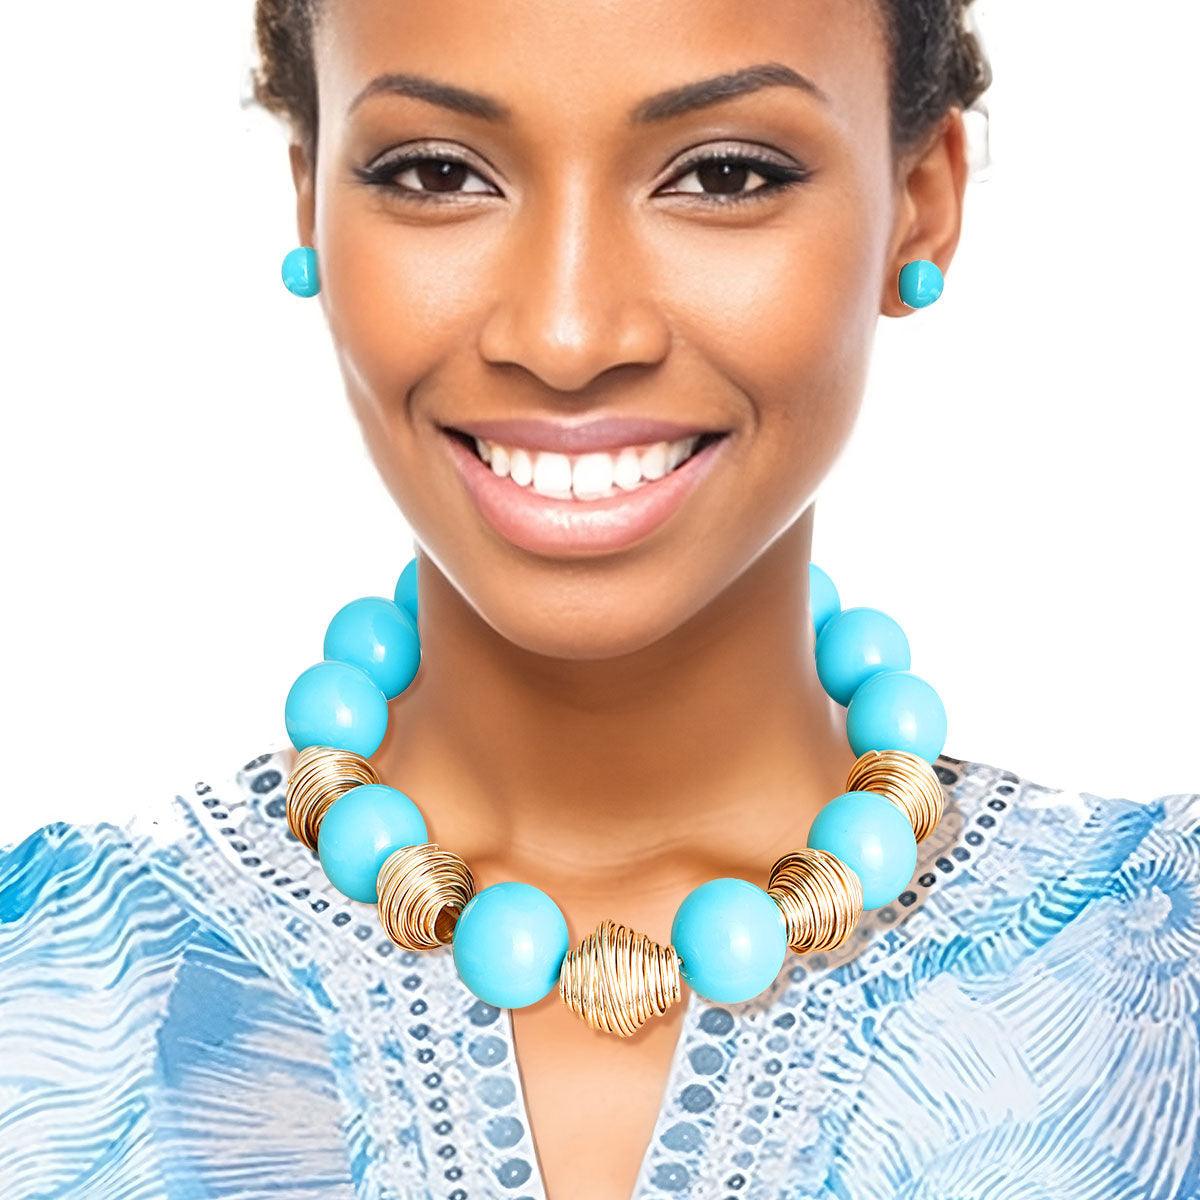 Stunning Chunky Teal Bead Jewelry Set: Necklace & Earrings